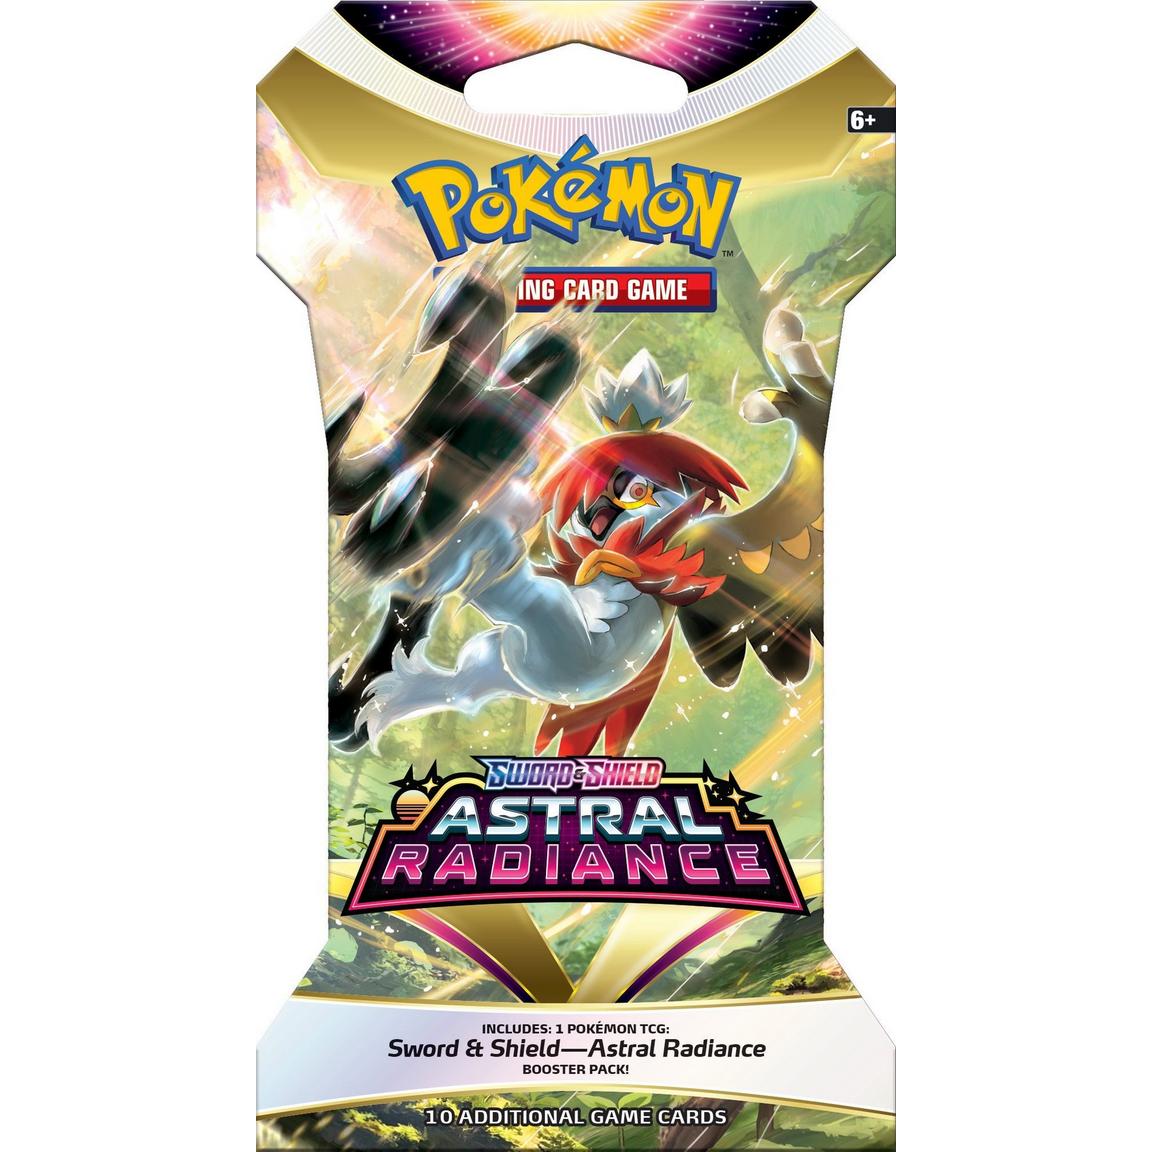 Pokemon: ASTRAL RADIANCE Check Out Sleeved Booster Pack